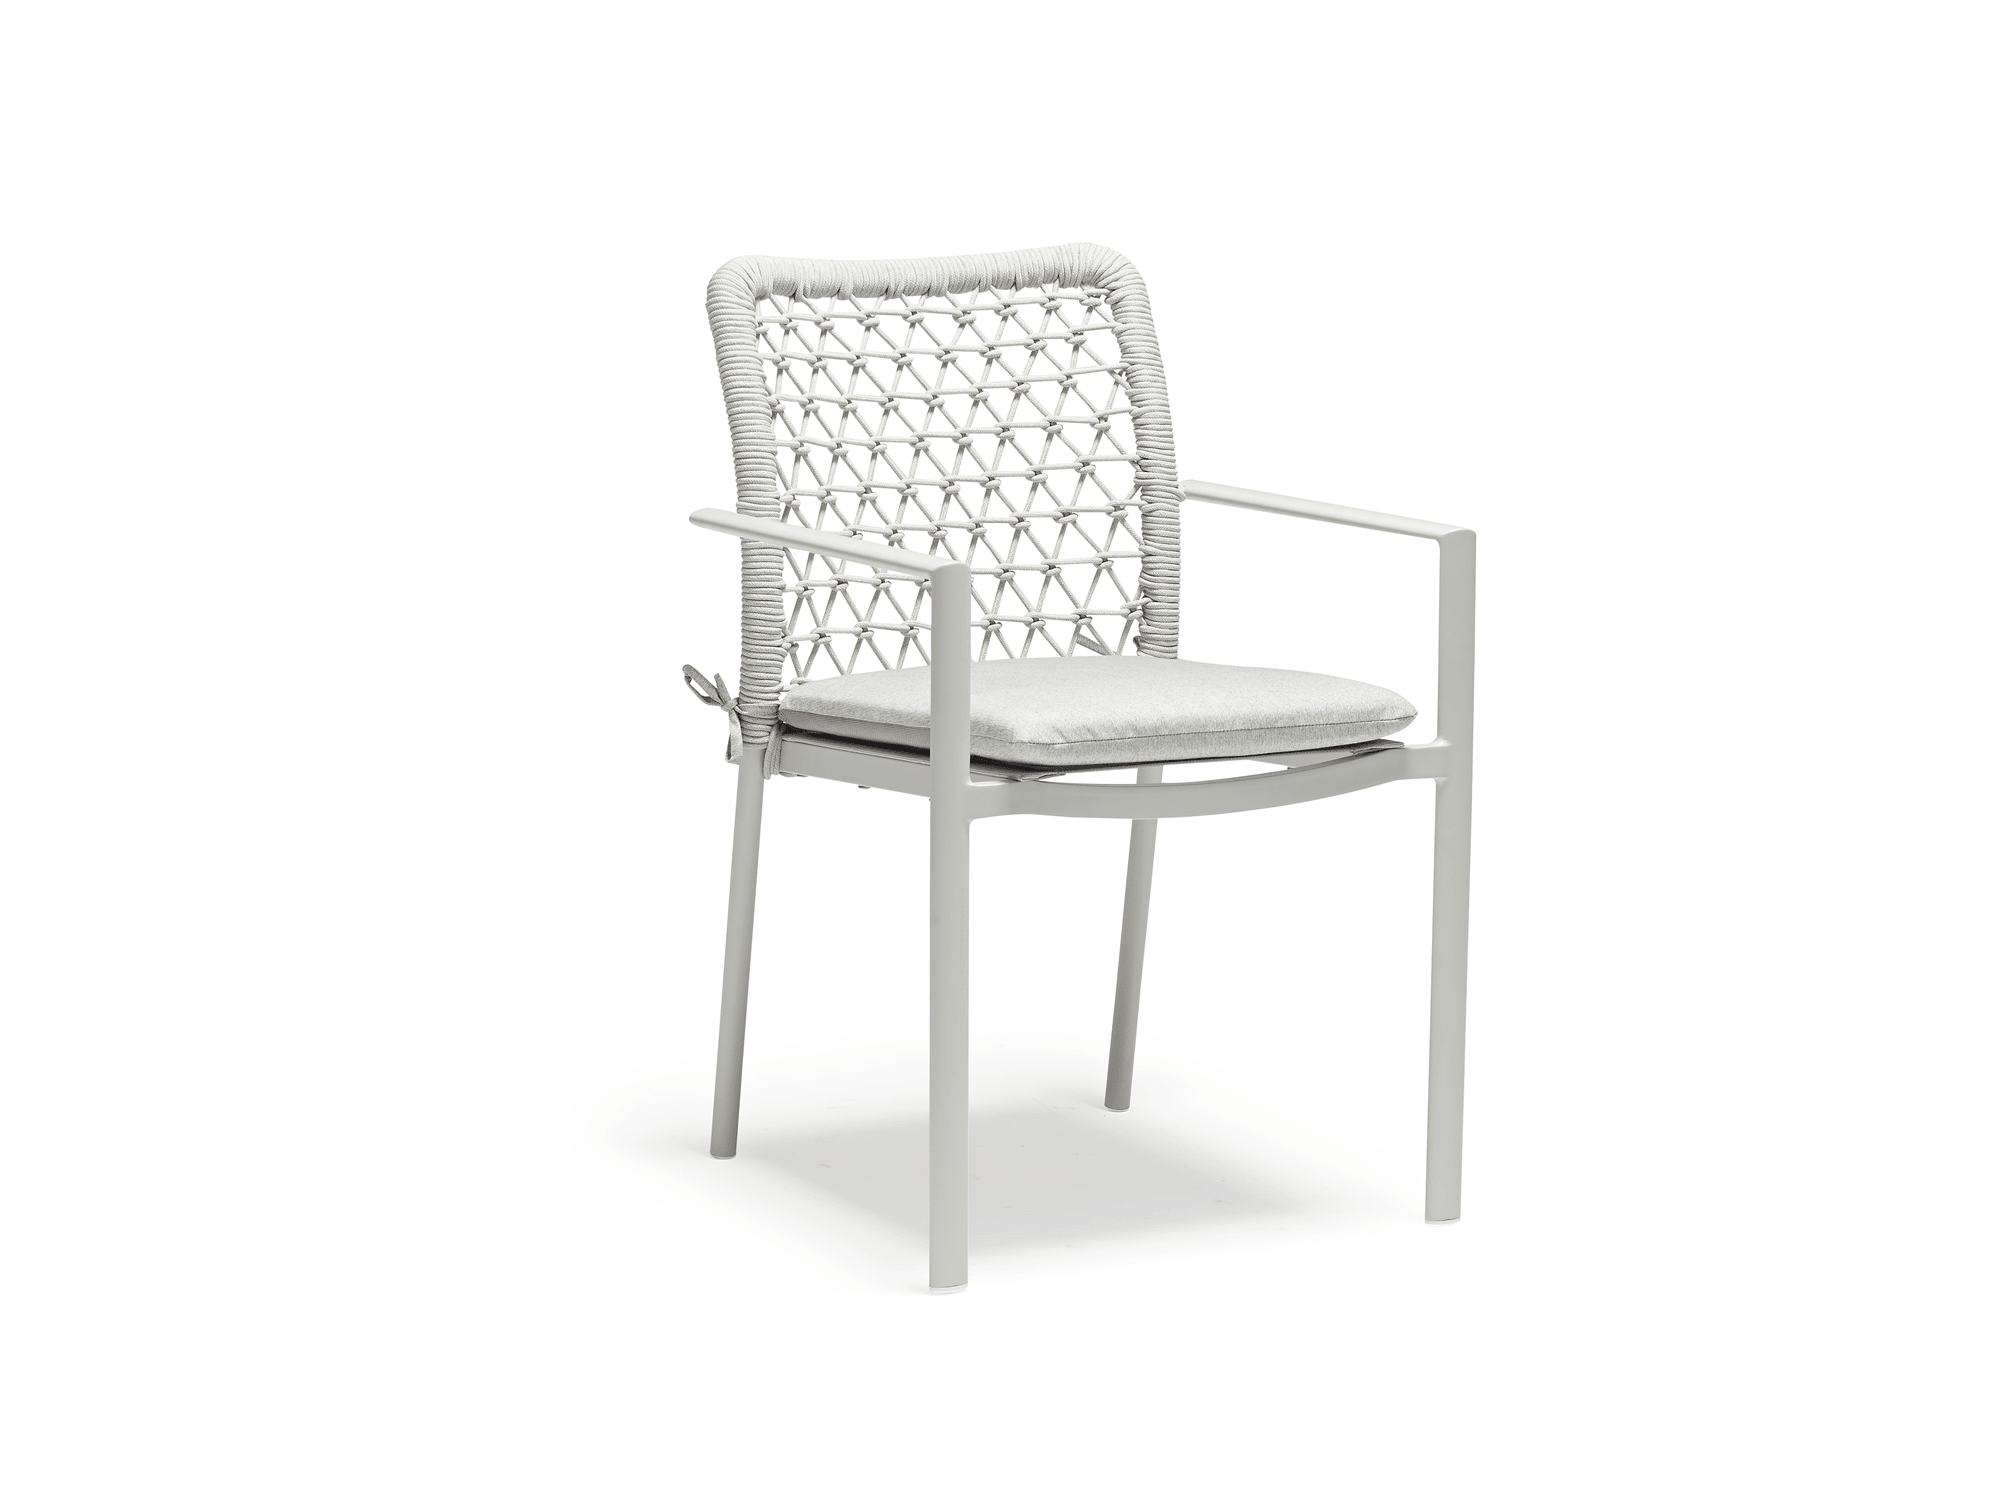 Amberly Dining Chair in Light Grey - Euro Living Furniture